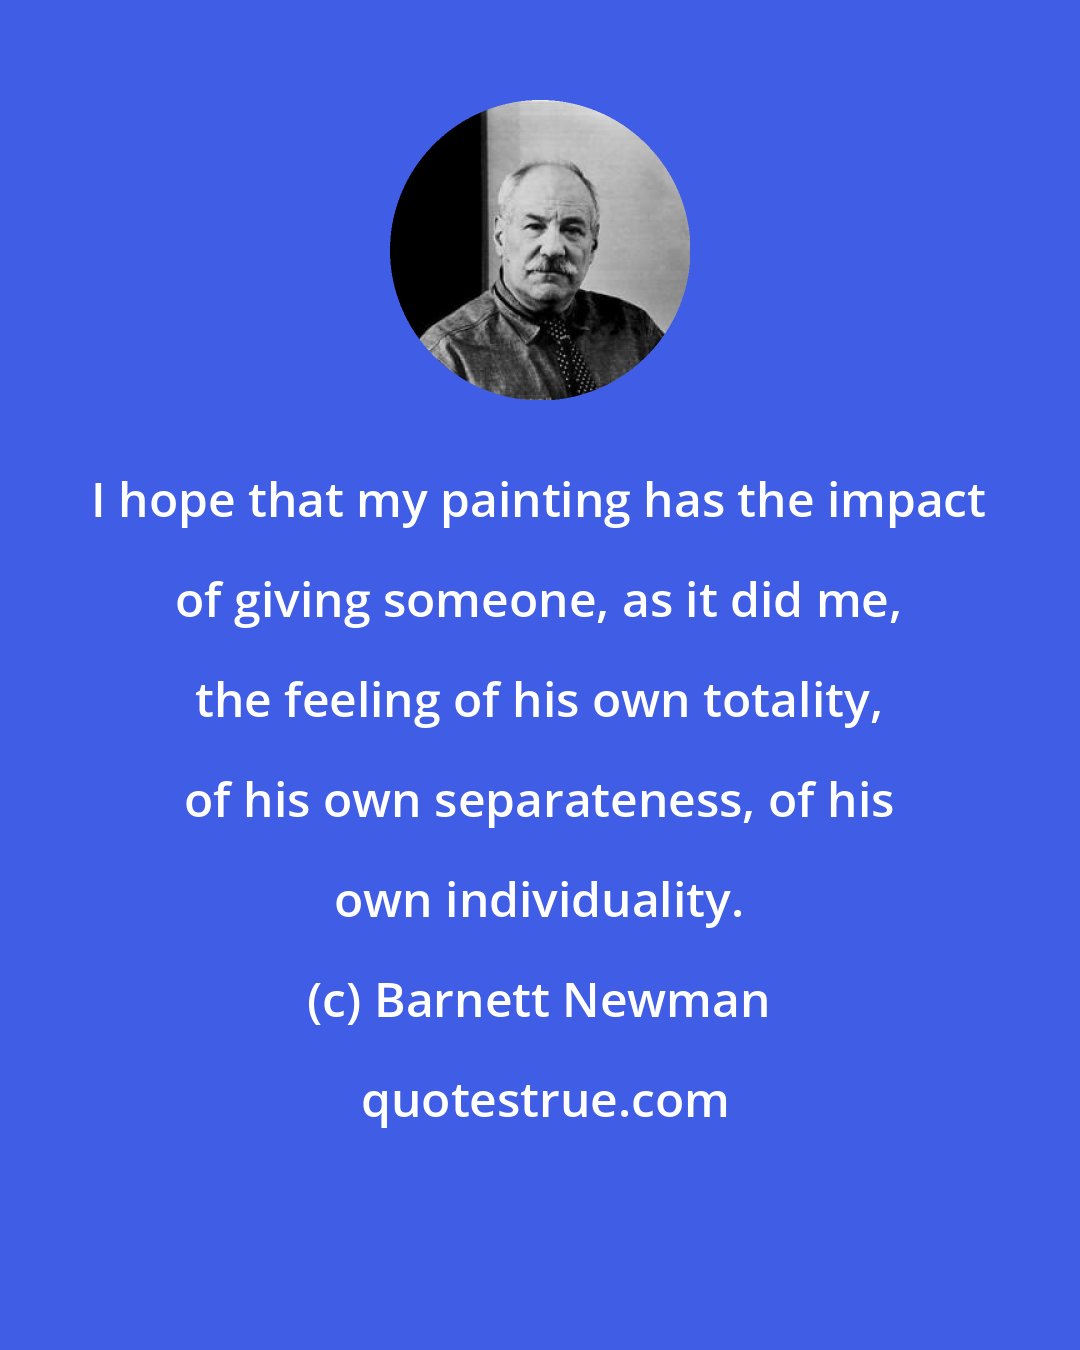 Barnett Newman: I hope that my painting has the impact of giving someone, as it did me, the feeling of his own totality, of his own separateness, of his own individuality.